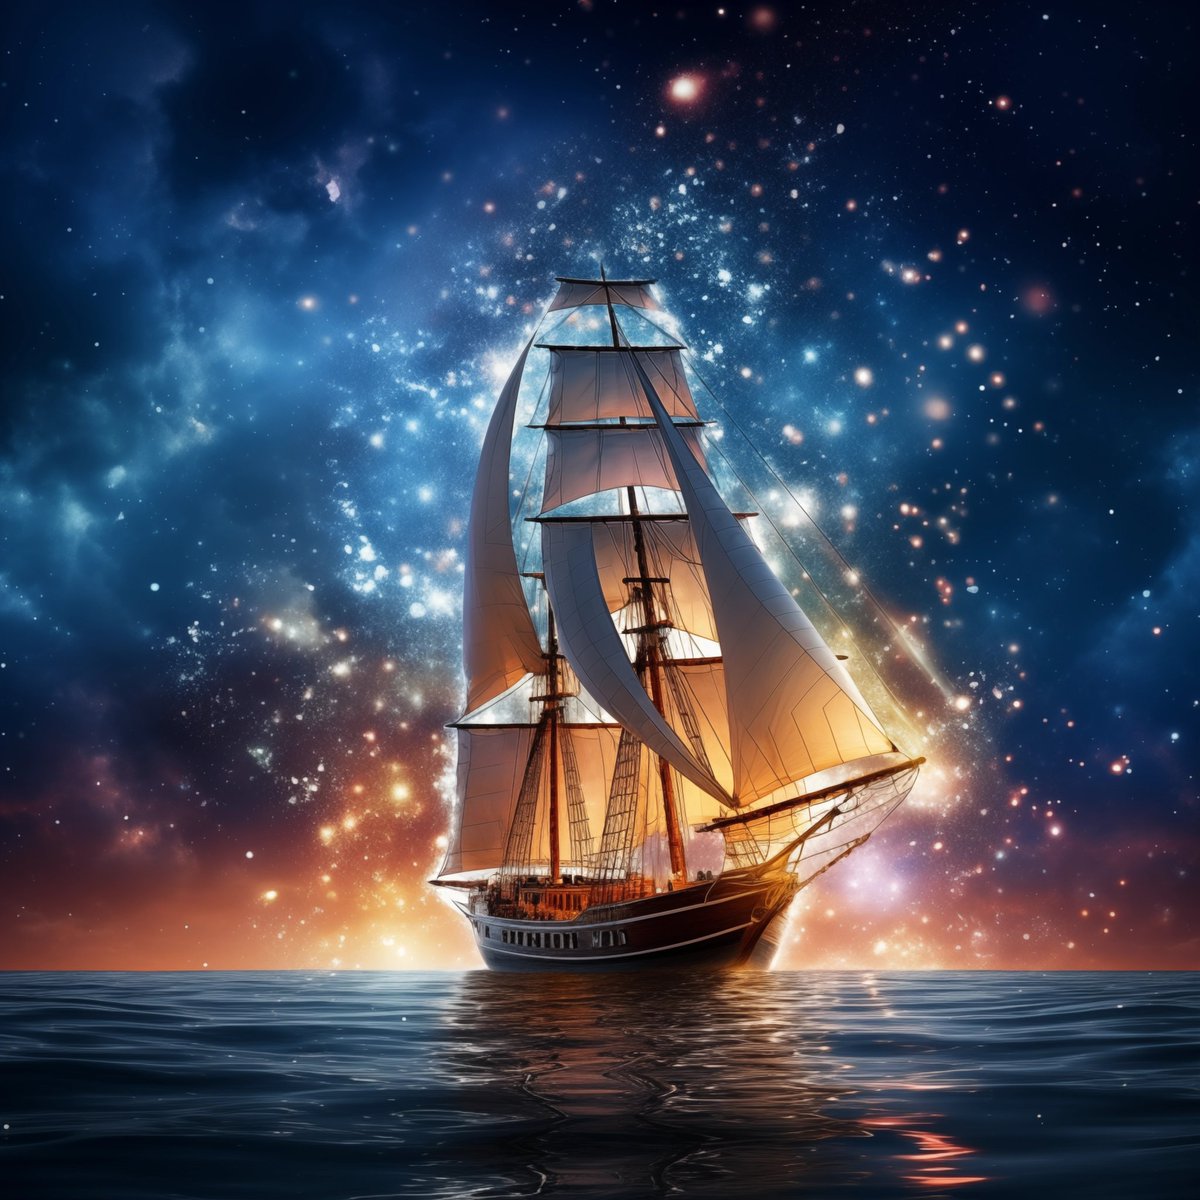 Goodmorning Legends.✨️ Another day, another chance to sail towards your dreams 🙌